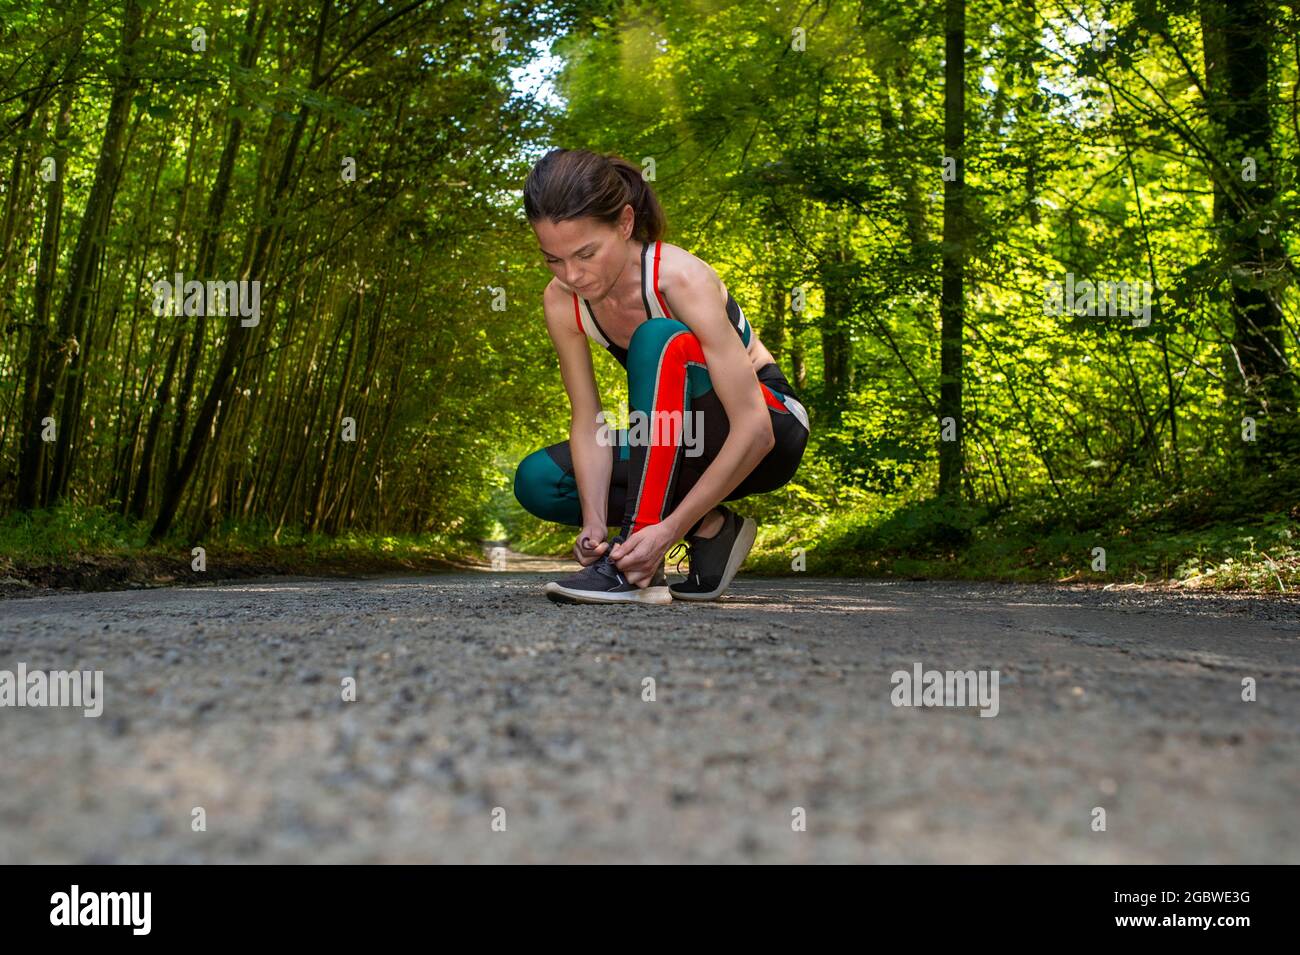 Woman runner tying shoelaces before jogging in autumn tree alley